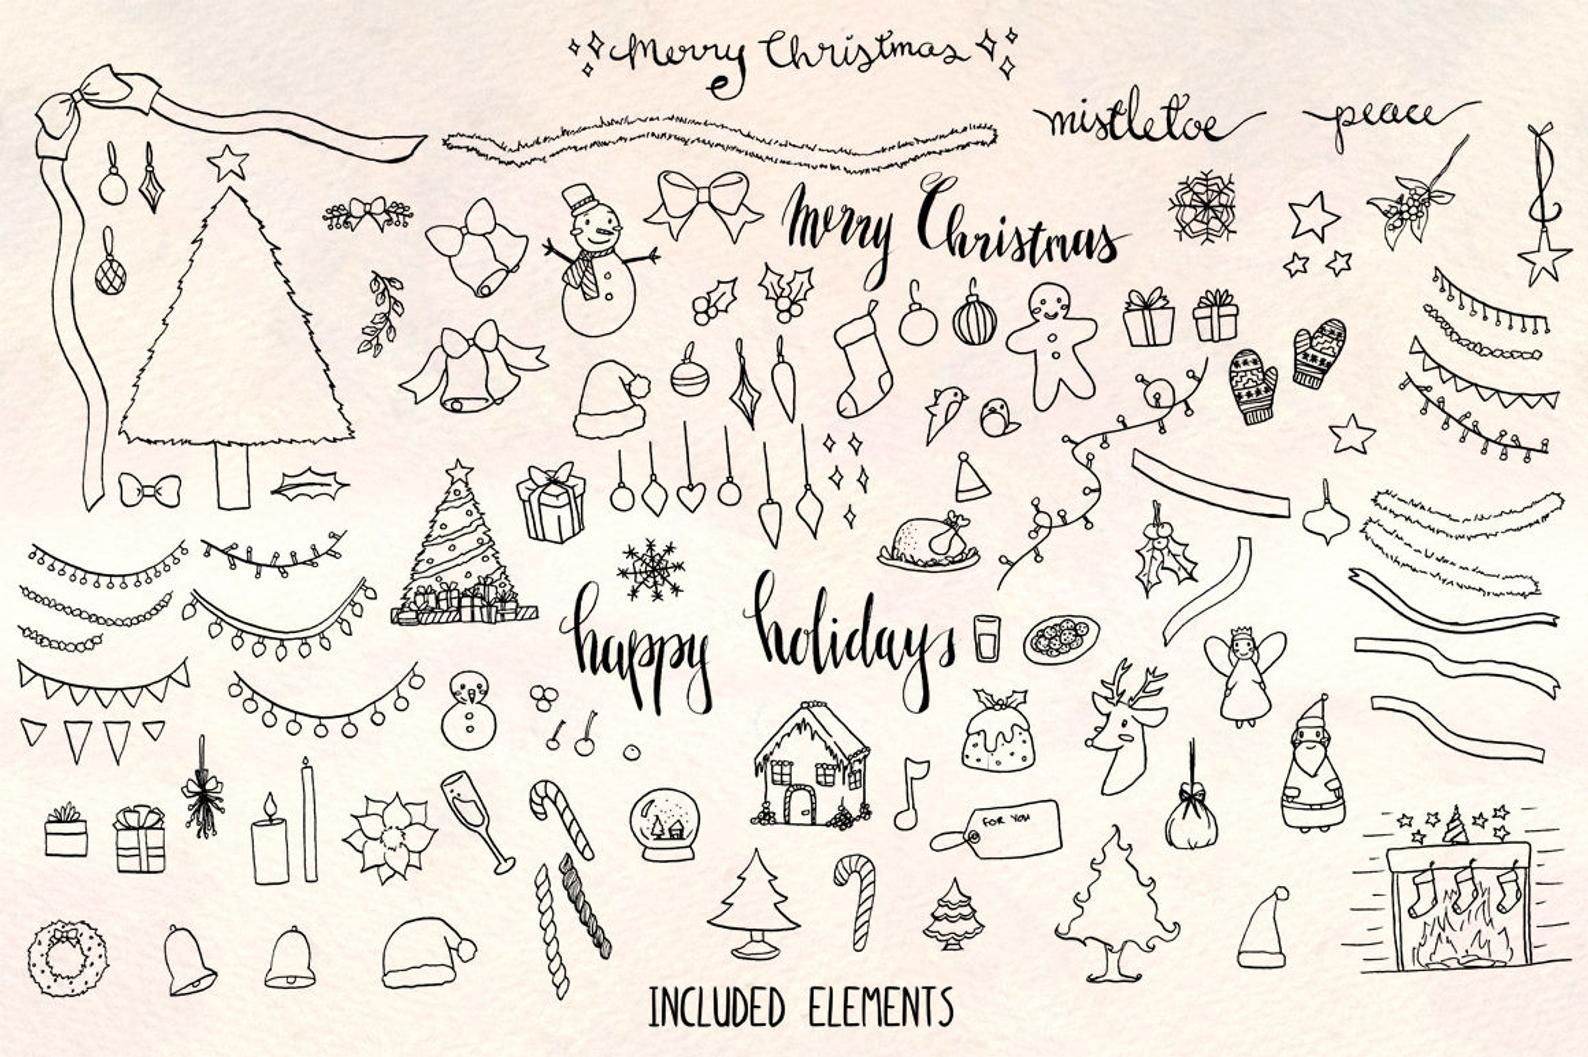 Merry Christmas - 120+ Holiday Illustrations - Vector Graphics Bundle! -   13 holiday Illustration vector ideas